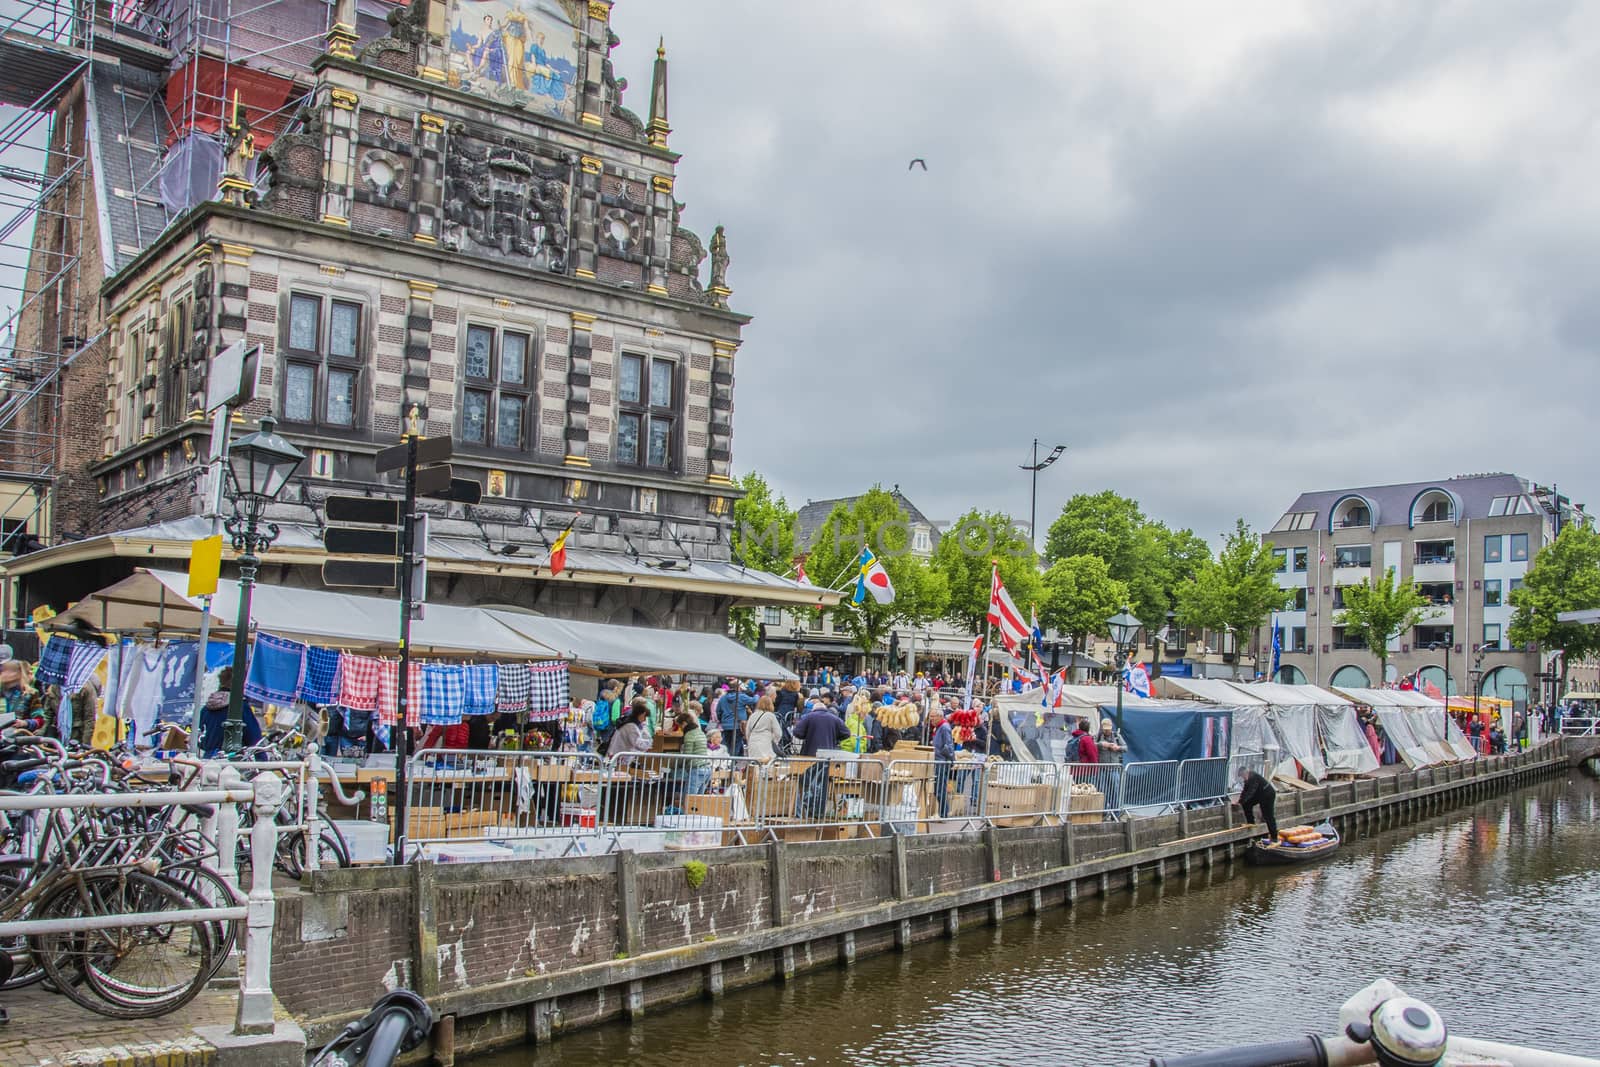 view of the alkmaar market where the historic cheese weighing building stands out. netherlands holland